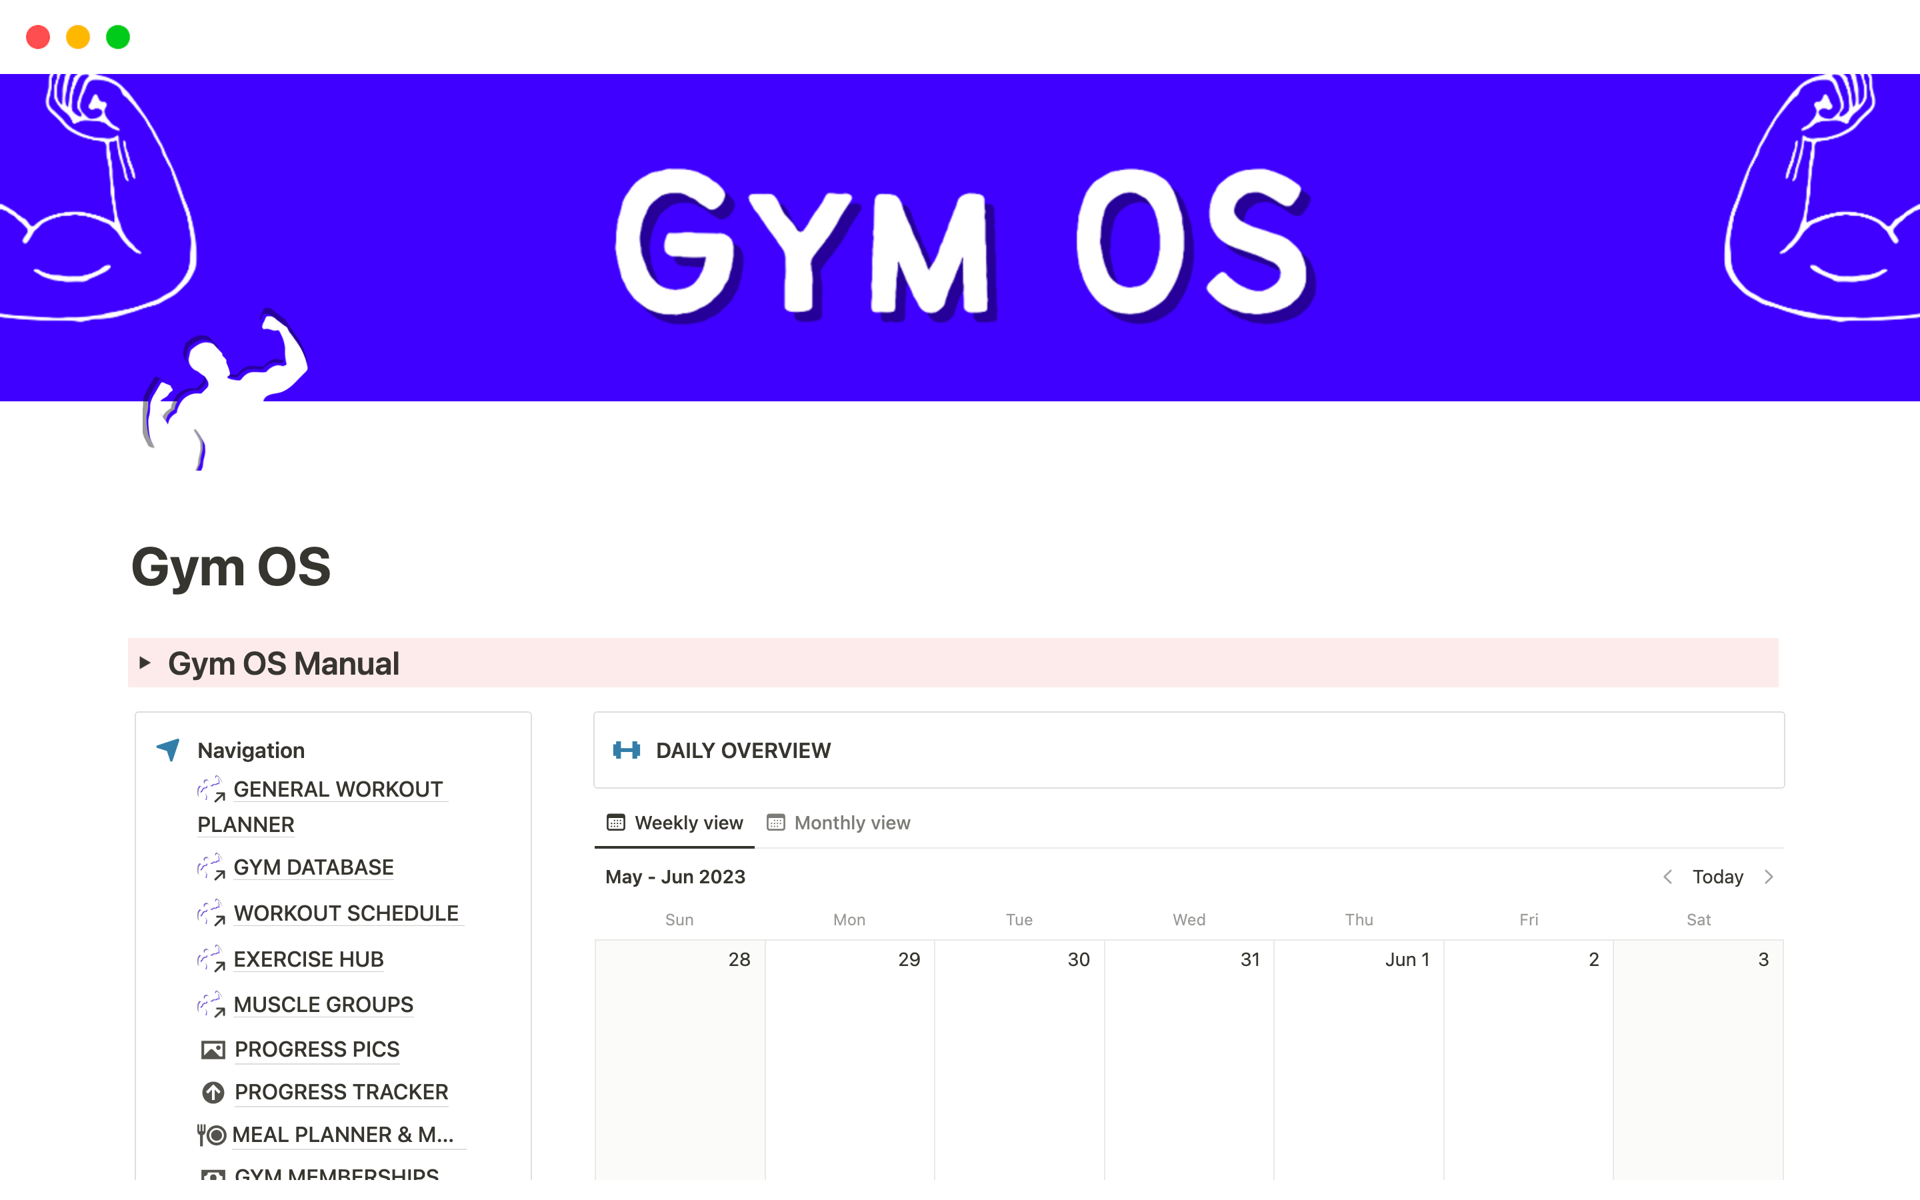 Your Ultimate Gym Planner & Tracker: Gym OS.

Do you want to start your gym journey, but don't know how? Maybe you're already going to the gym and you want to track your progress?

That's why I created this template. Less uncertainty & chaos, more clarity & progress.